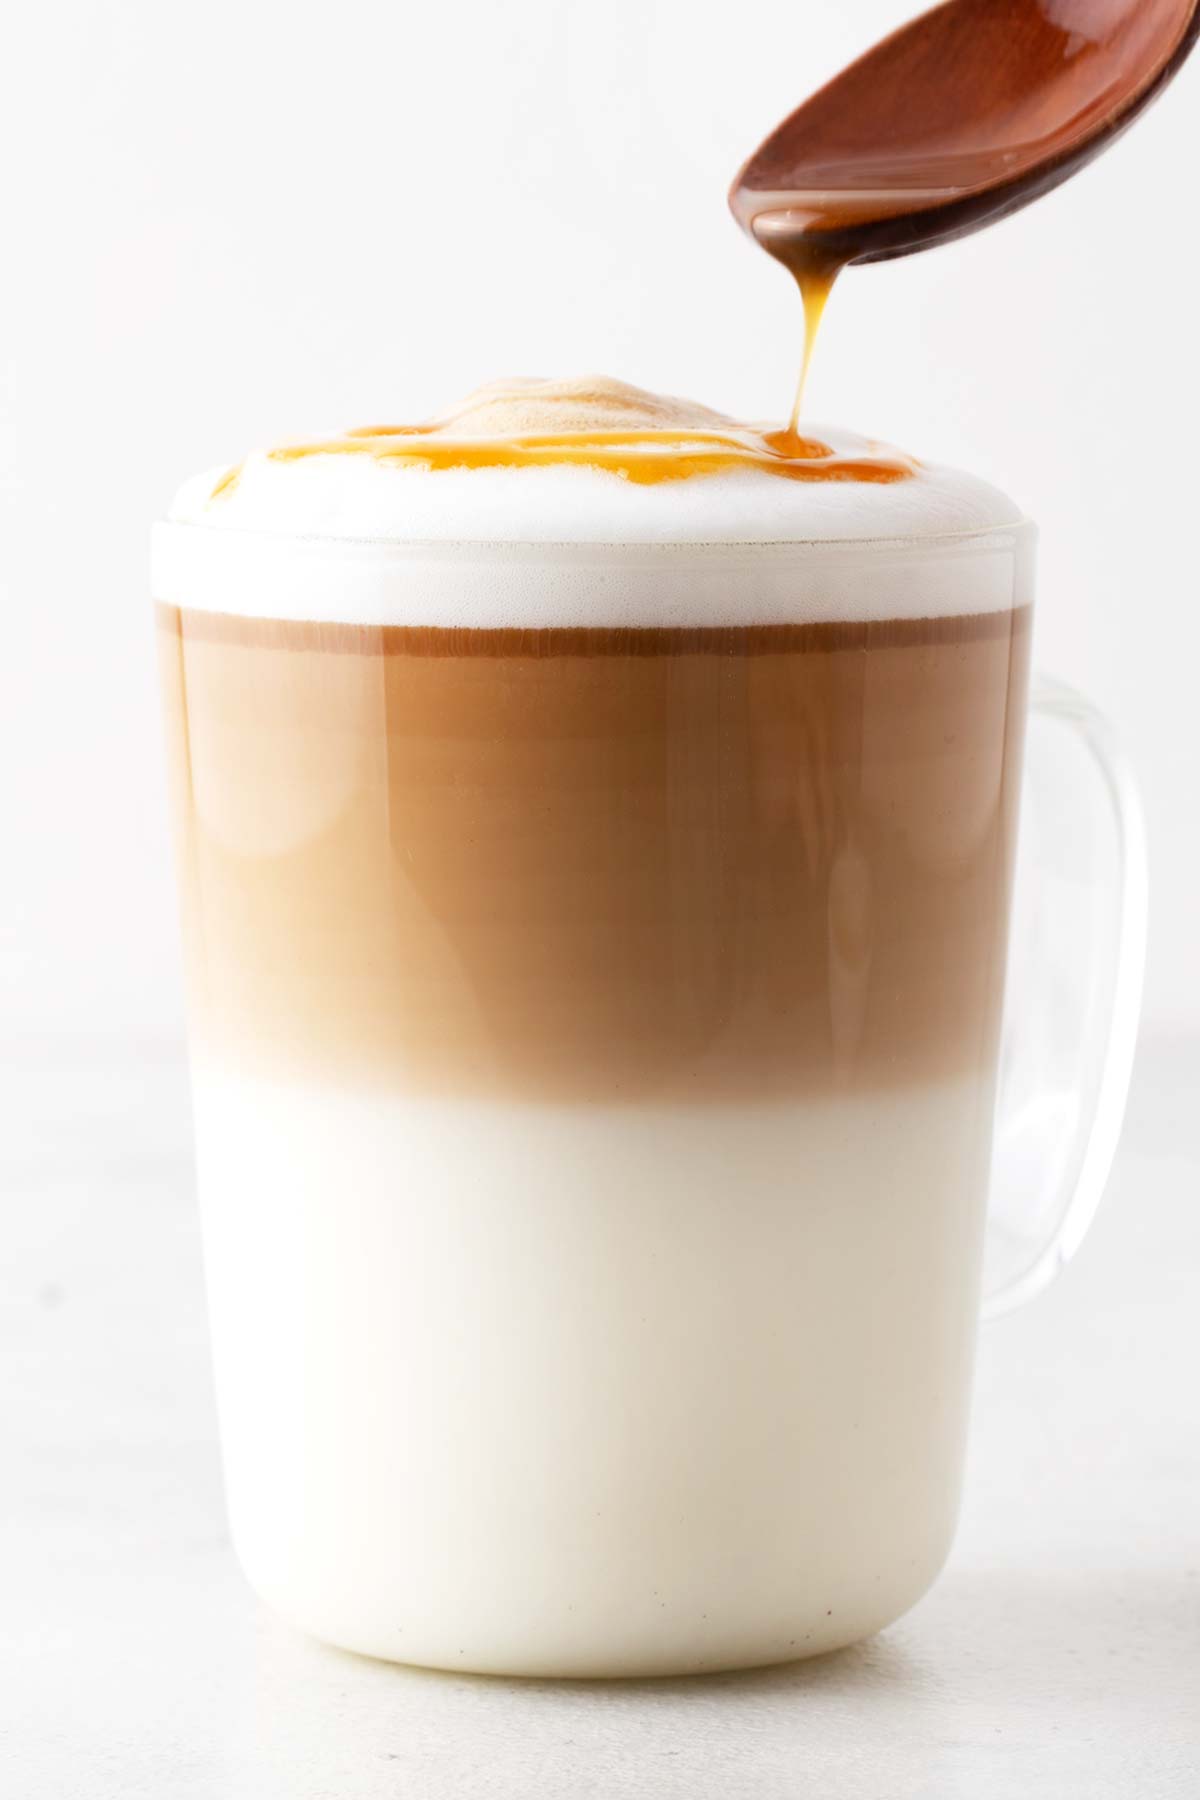 Drizzling caramel sauce on top of a Caramel Macchiato drink.